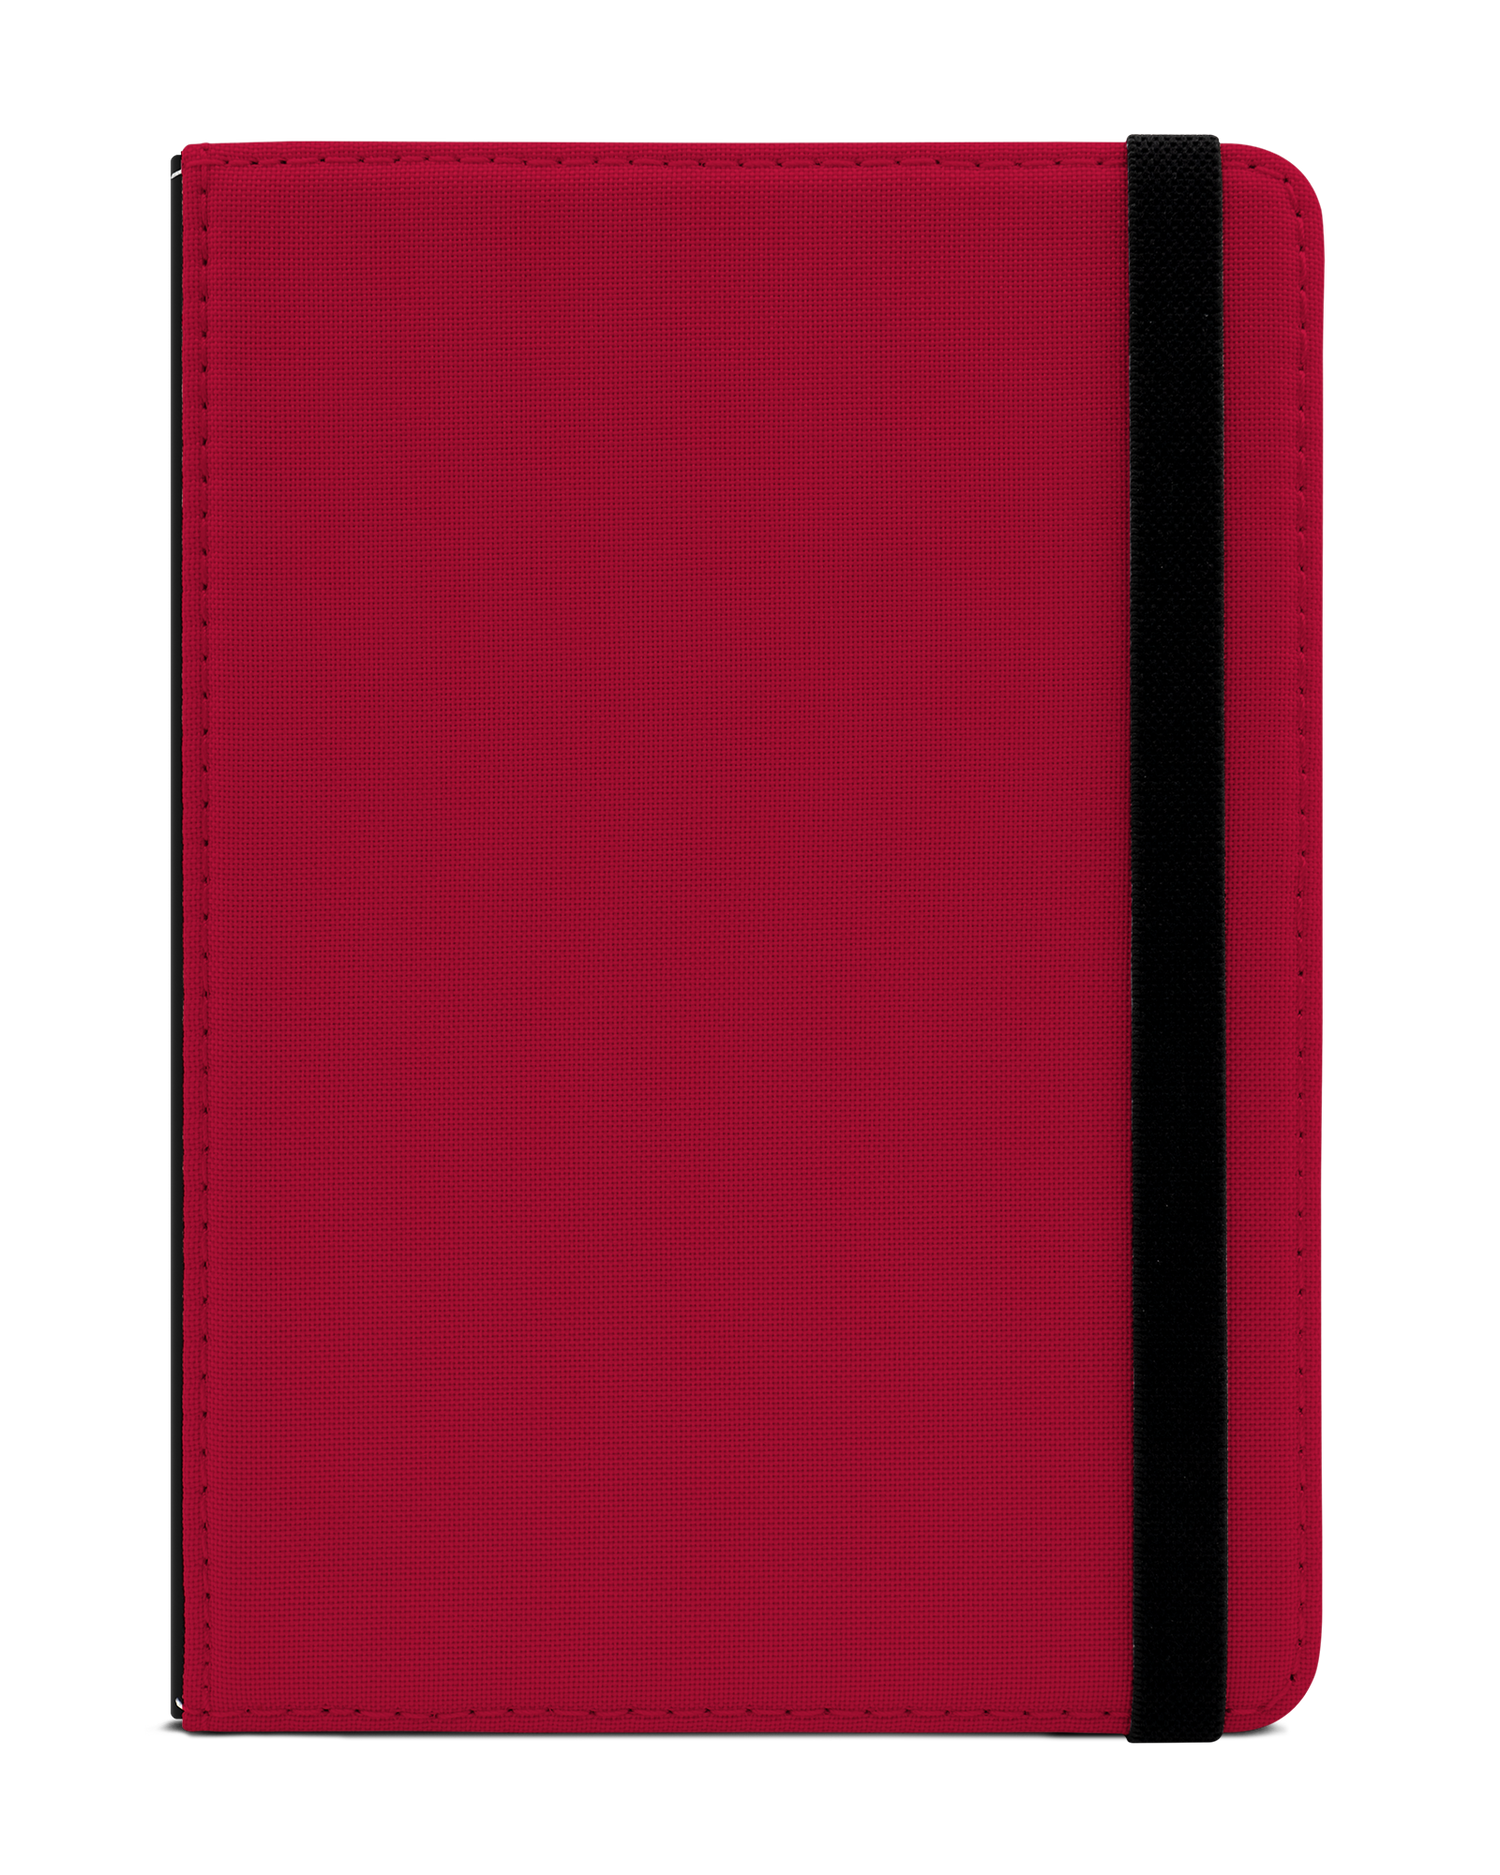 RED eReader Case for tolino vision 1 to 4 HD: Front View